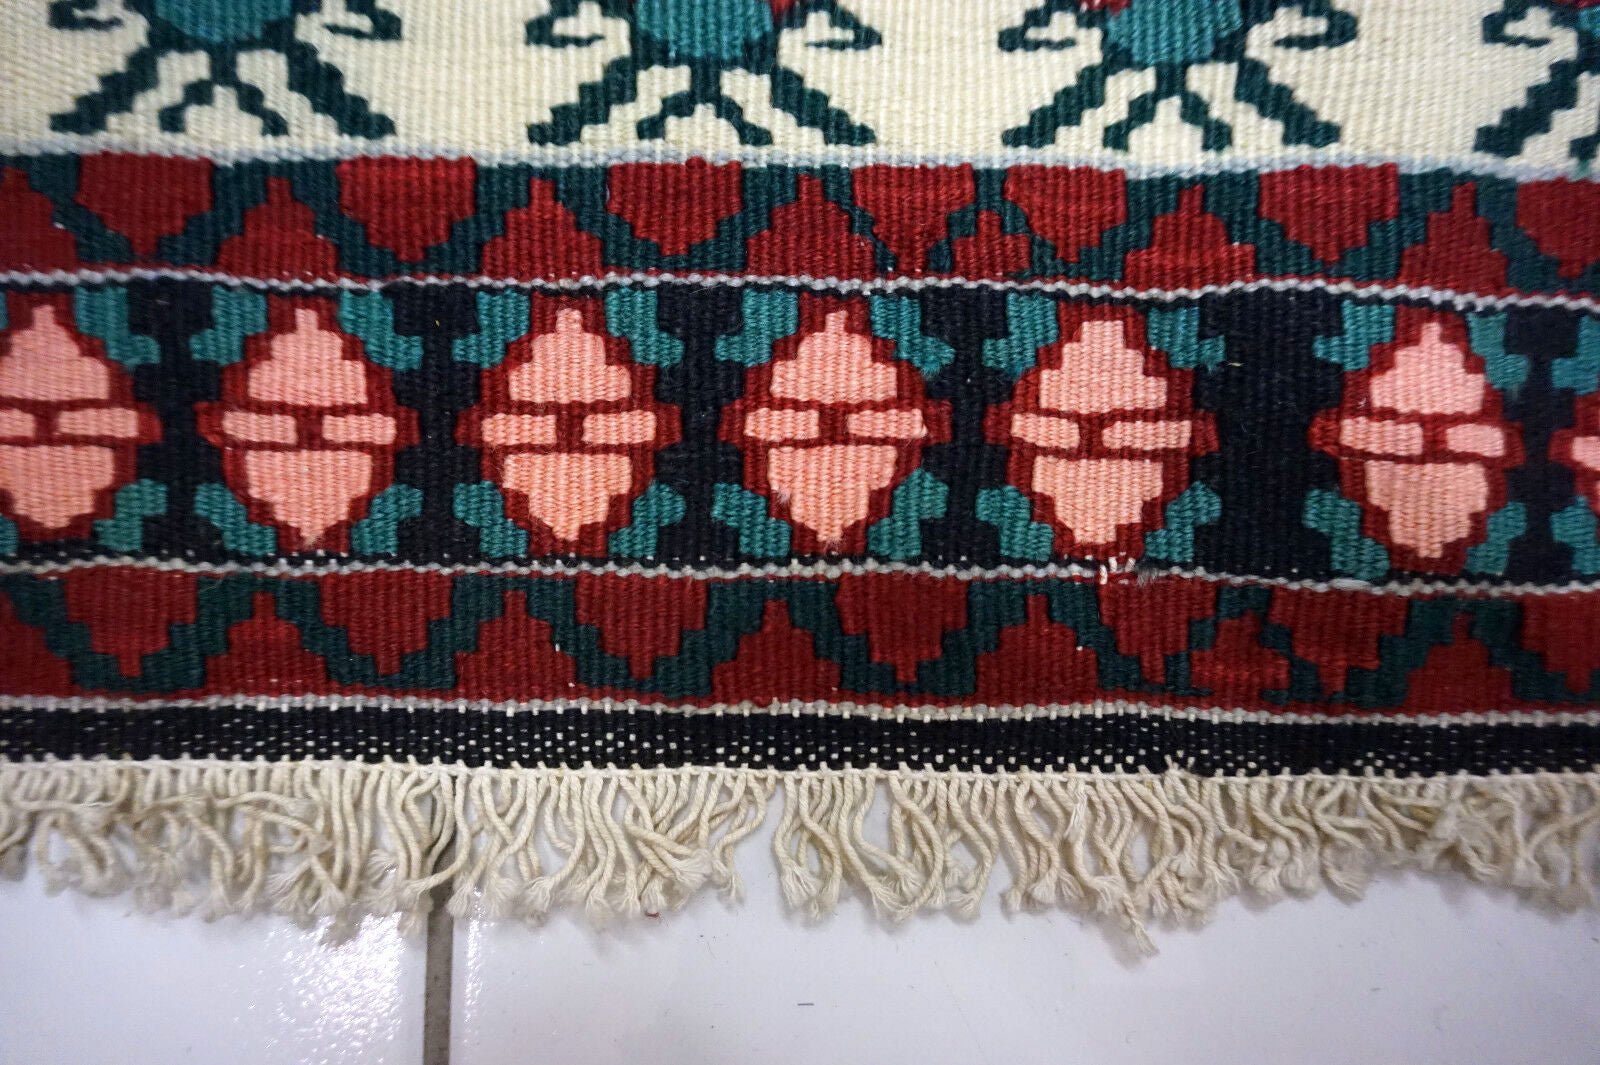 High-quality vintage rug in excellent condition from the 1970s